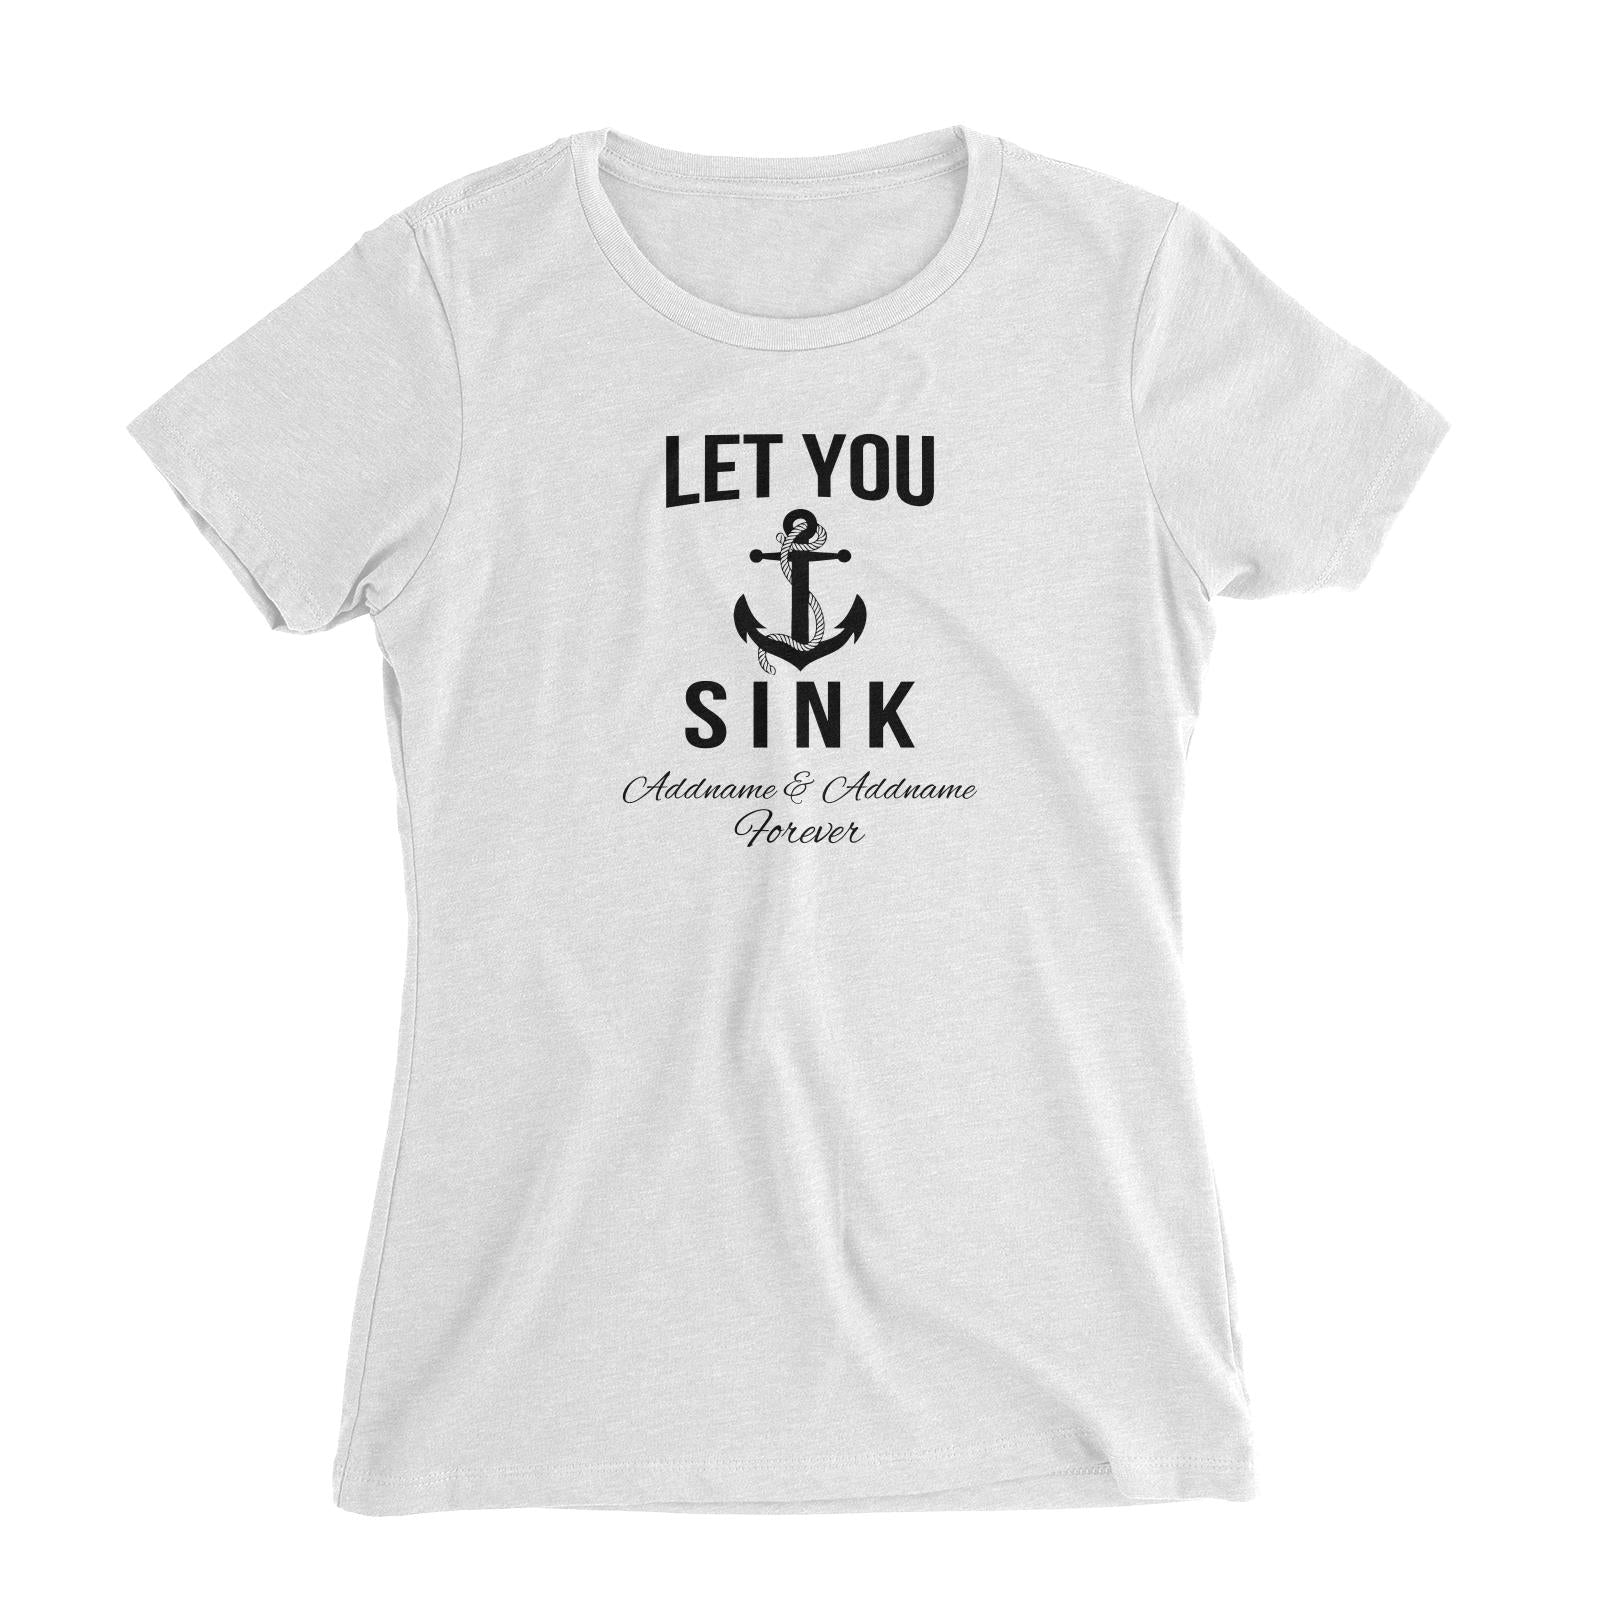 Couple Series Let You Sink Addname & Addname Forever Women Slim Fit T-Shirt